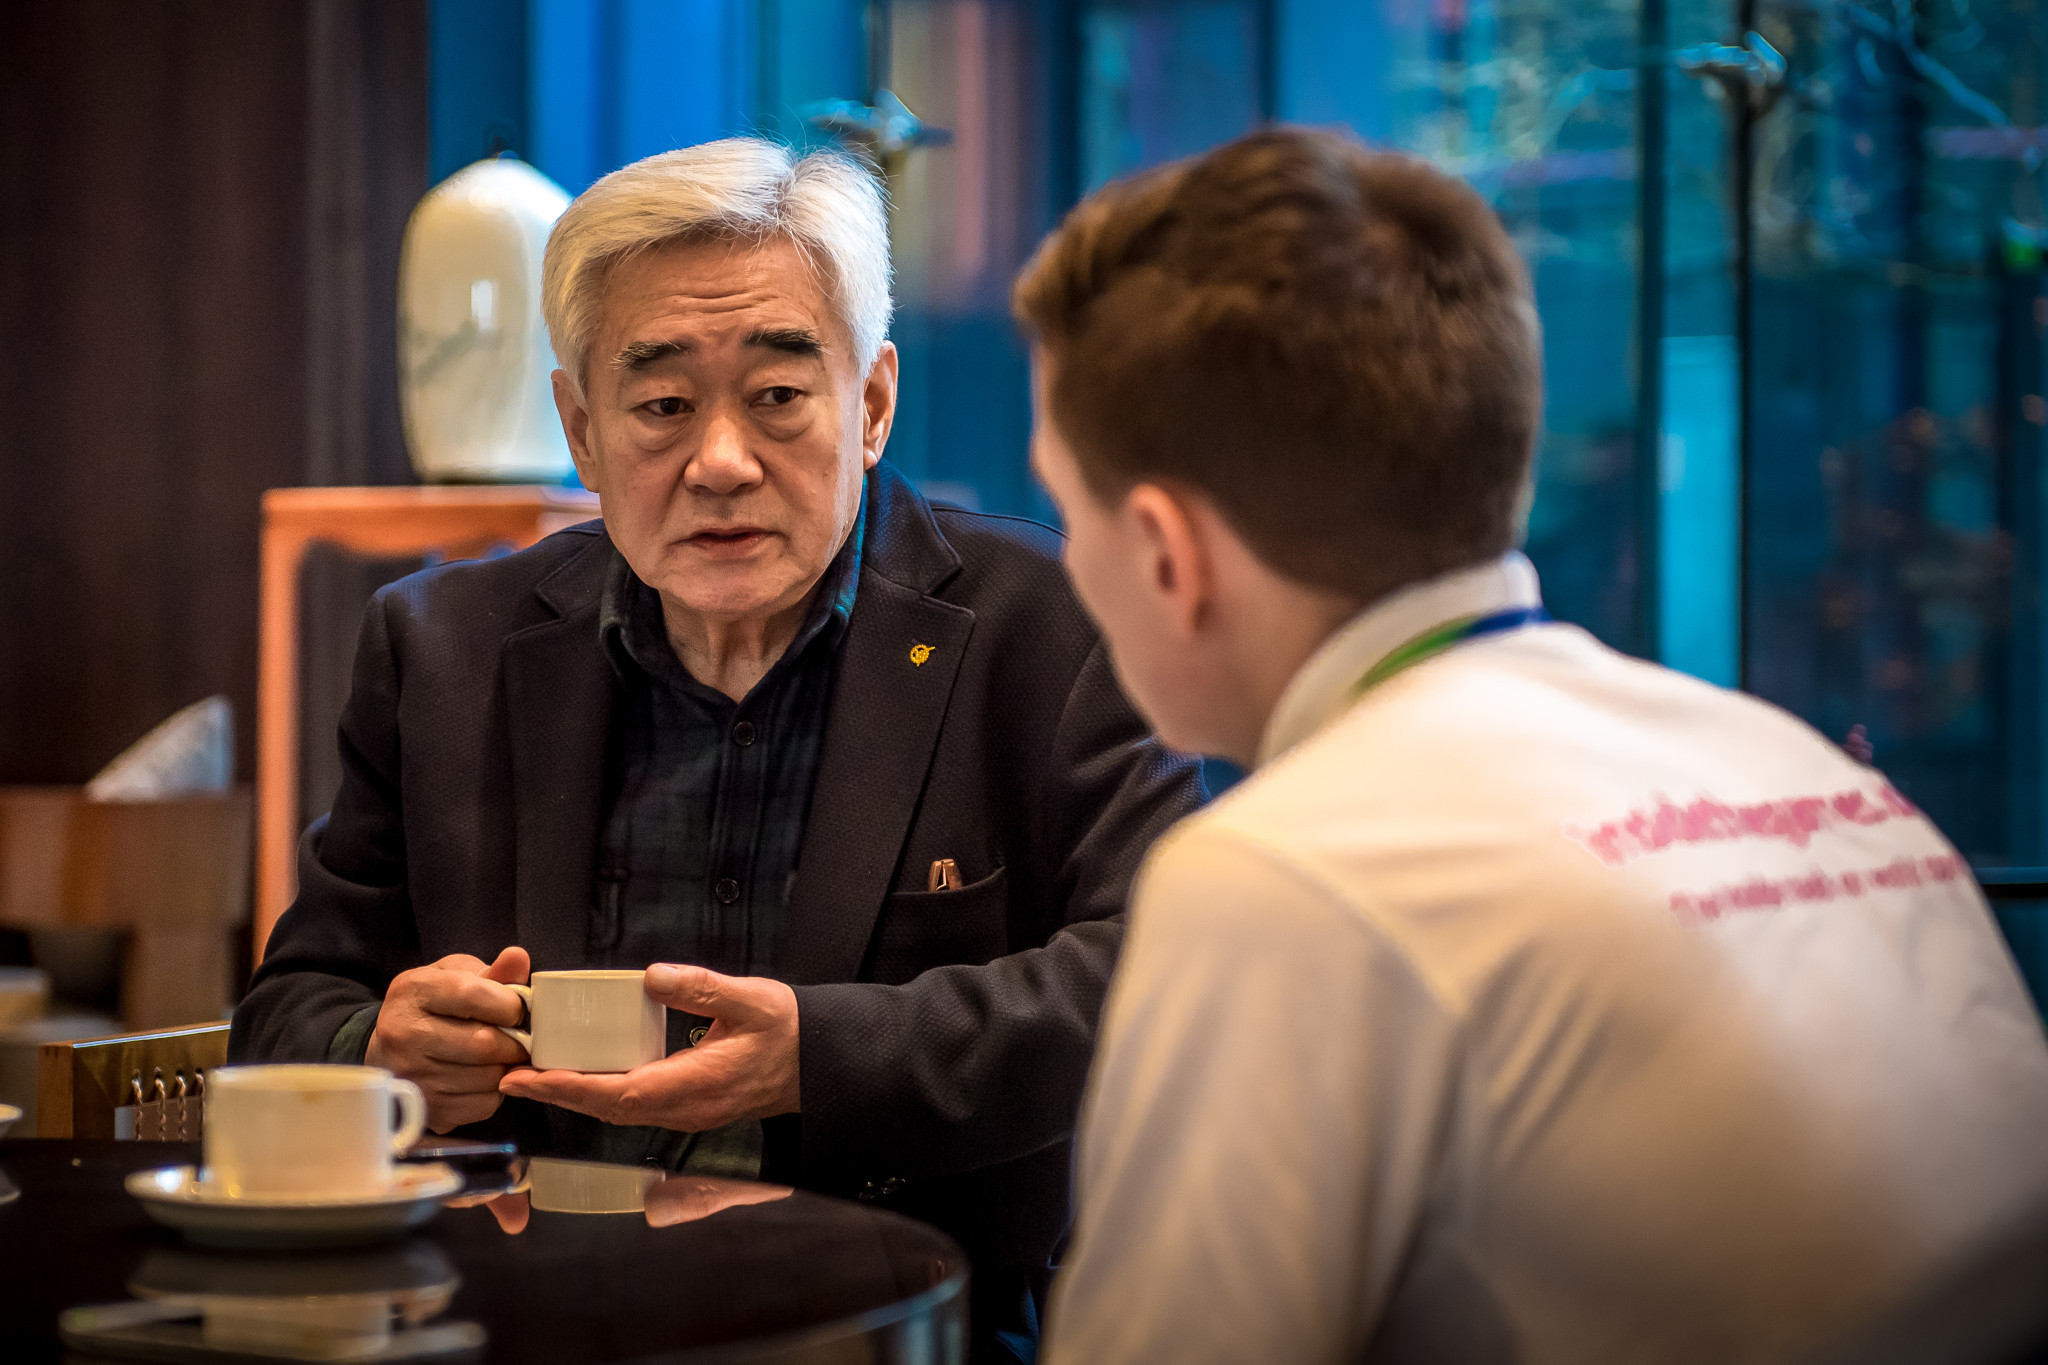 World Taekwondo President reveals interest from Russia and Mexico in hosting future professional events